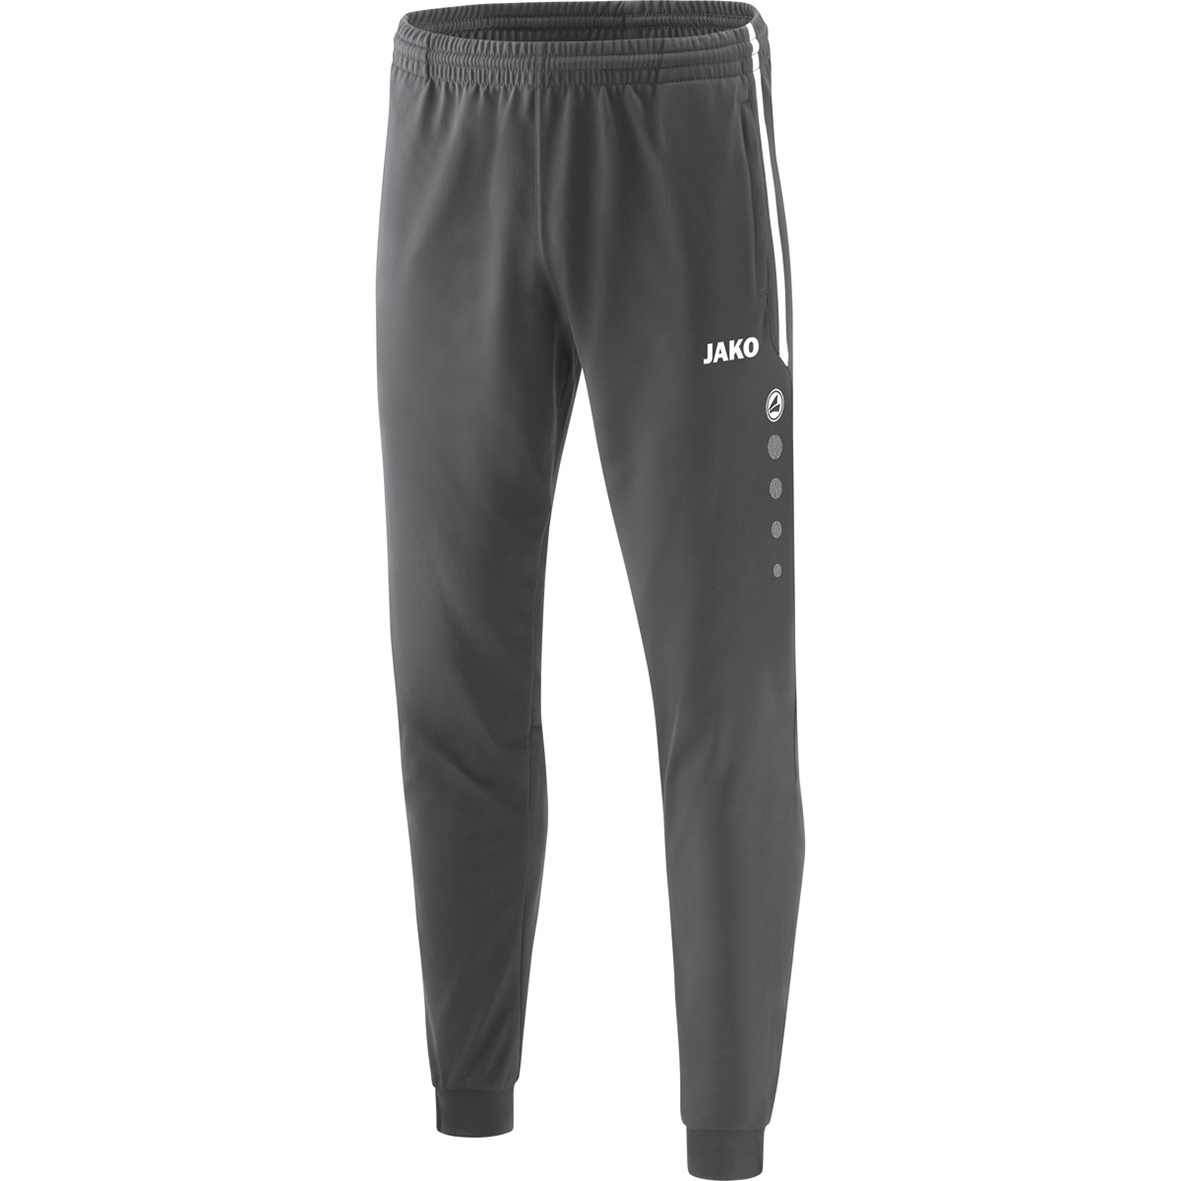 TROUSERS JAKO COMPETITION 2.0, LIGHT ANTHRACITE MEN.